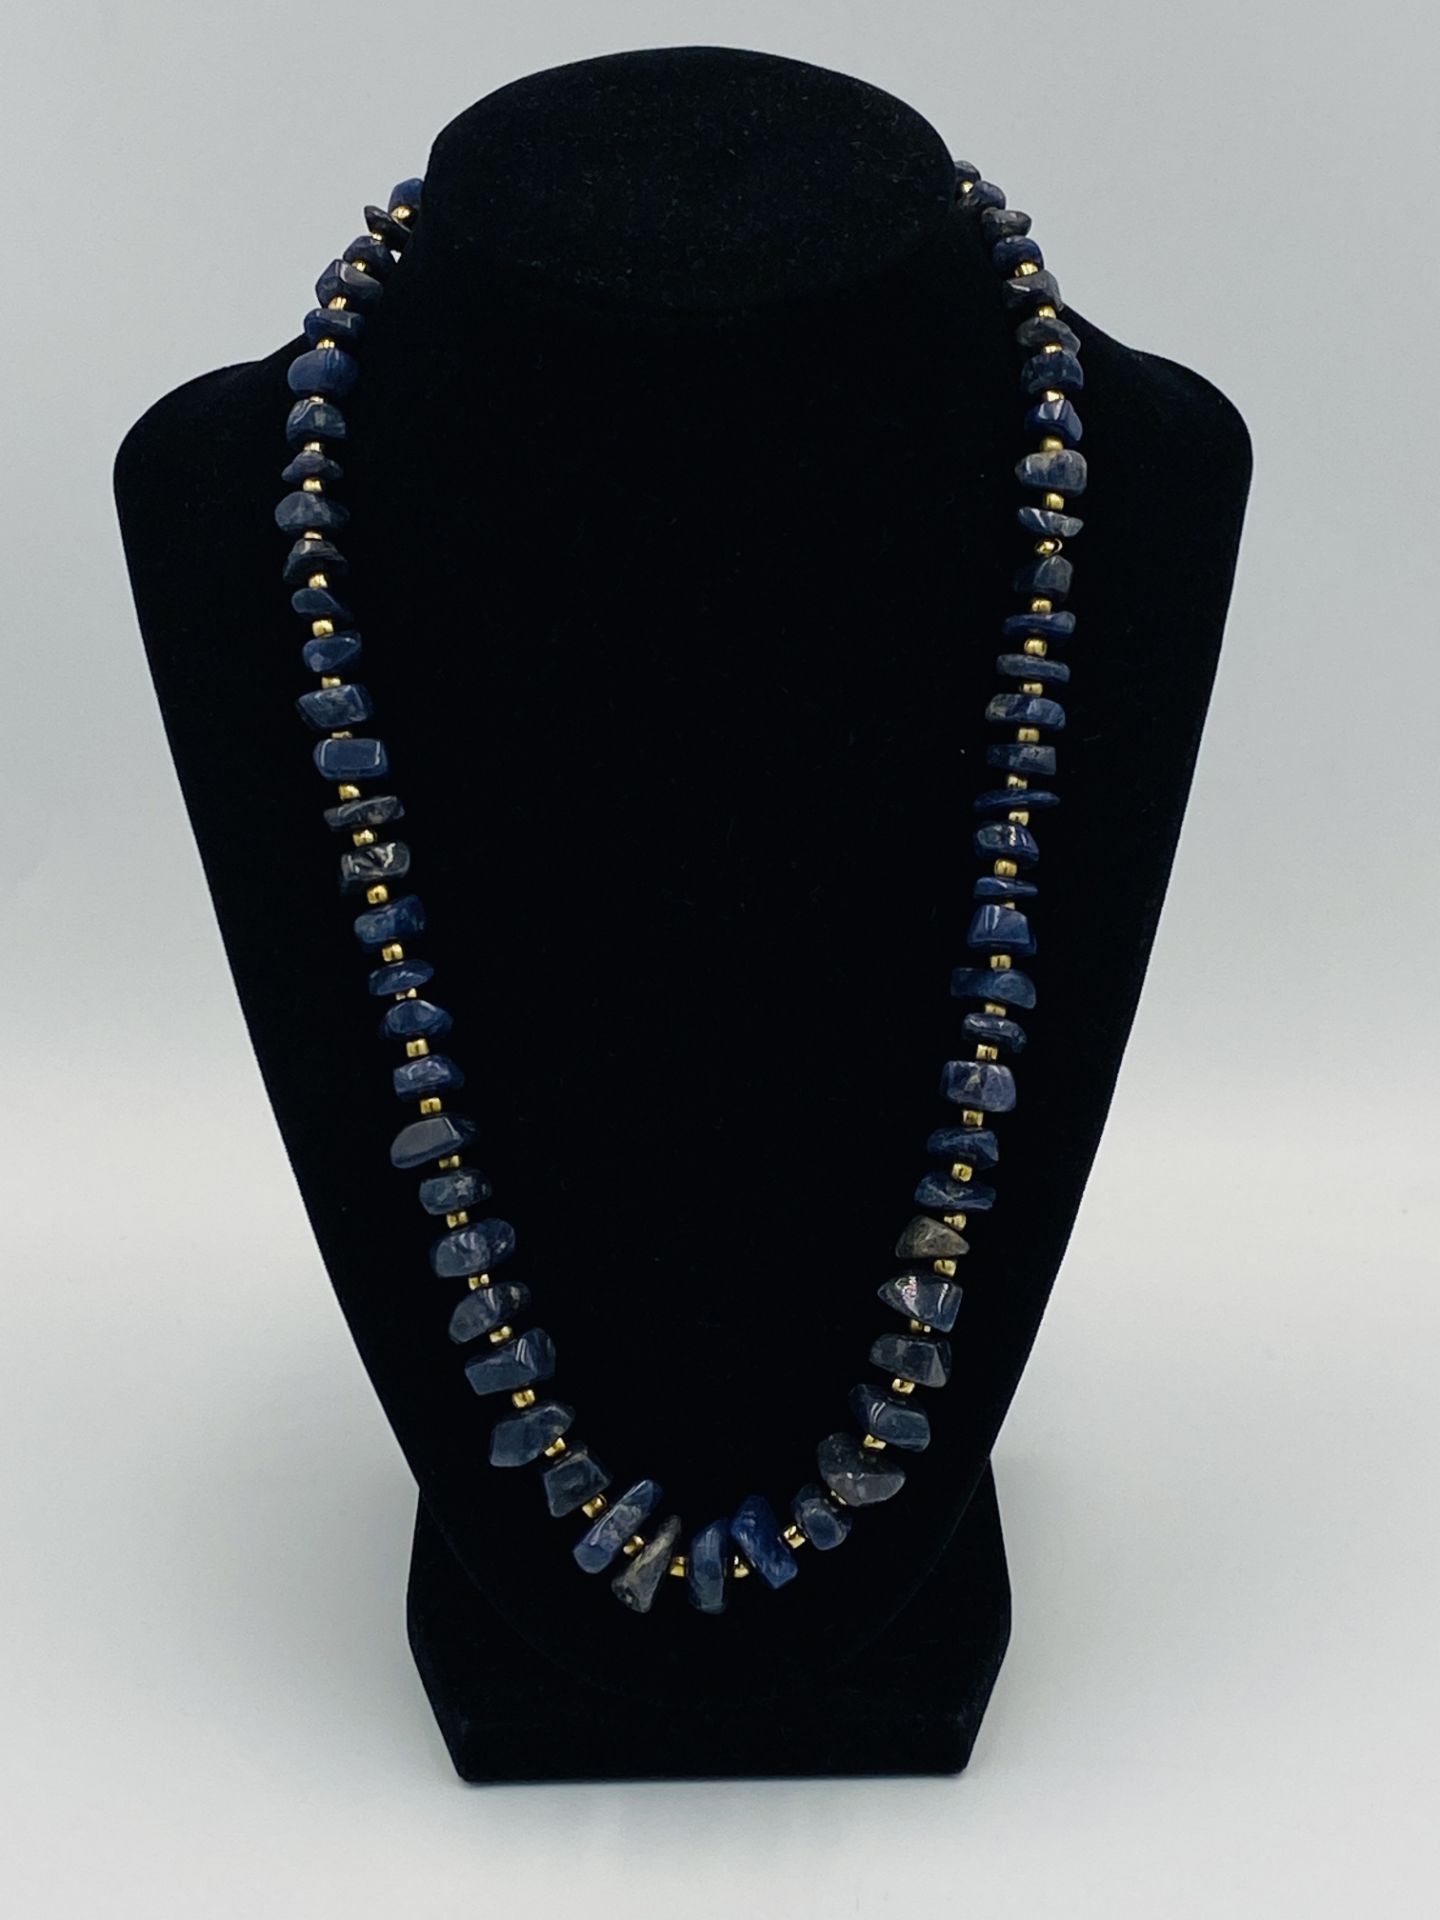 Four agate bead necklaces - Image 4 of 6